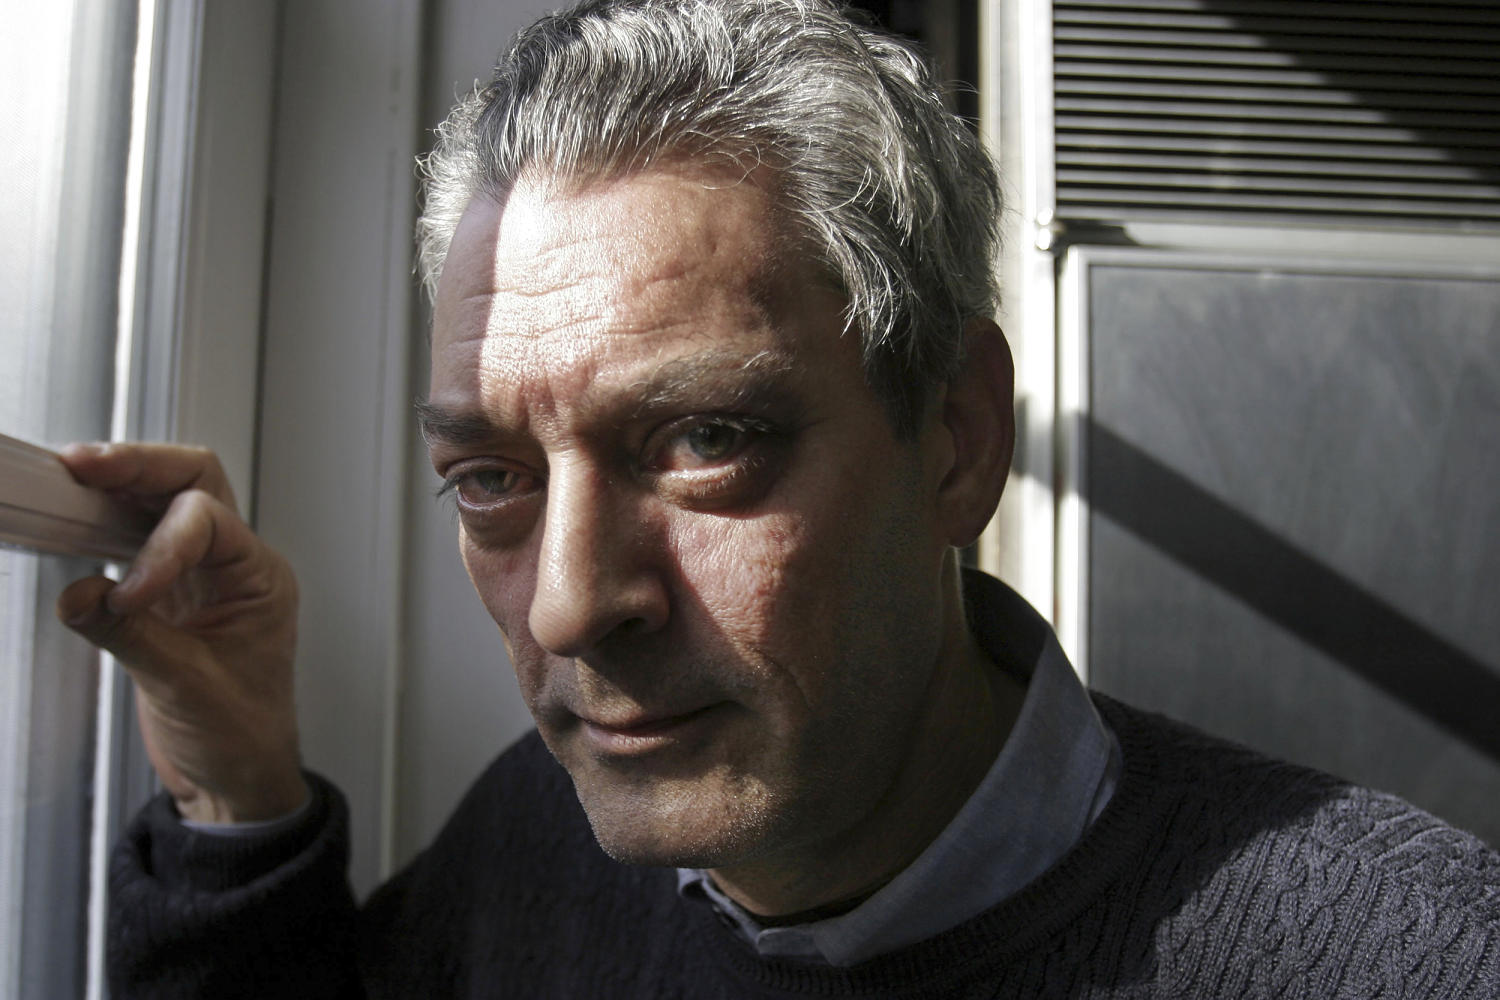 Paul Auster, famed novelist known for 'The New York Trilogy' and '4 3 2 1,' dies at 77